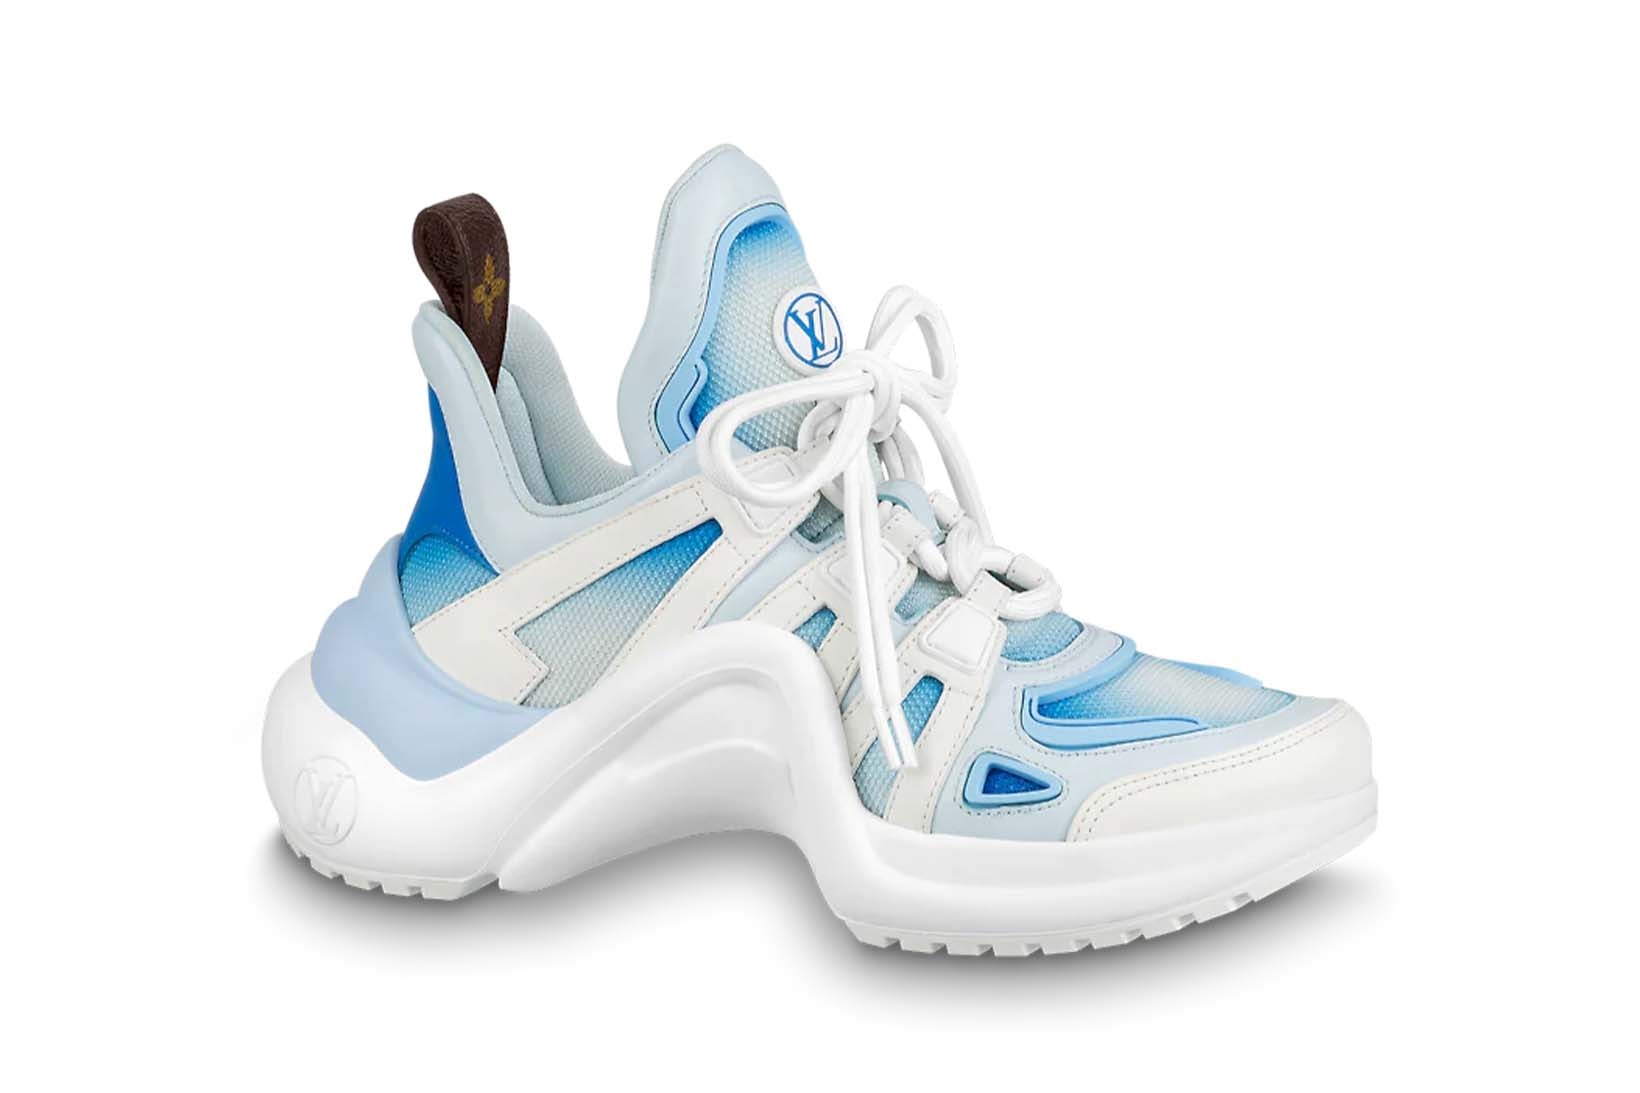 Louis Vuitton unveils a new range of Archlight Sneakers: The LV